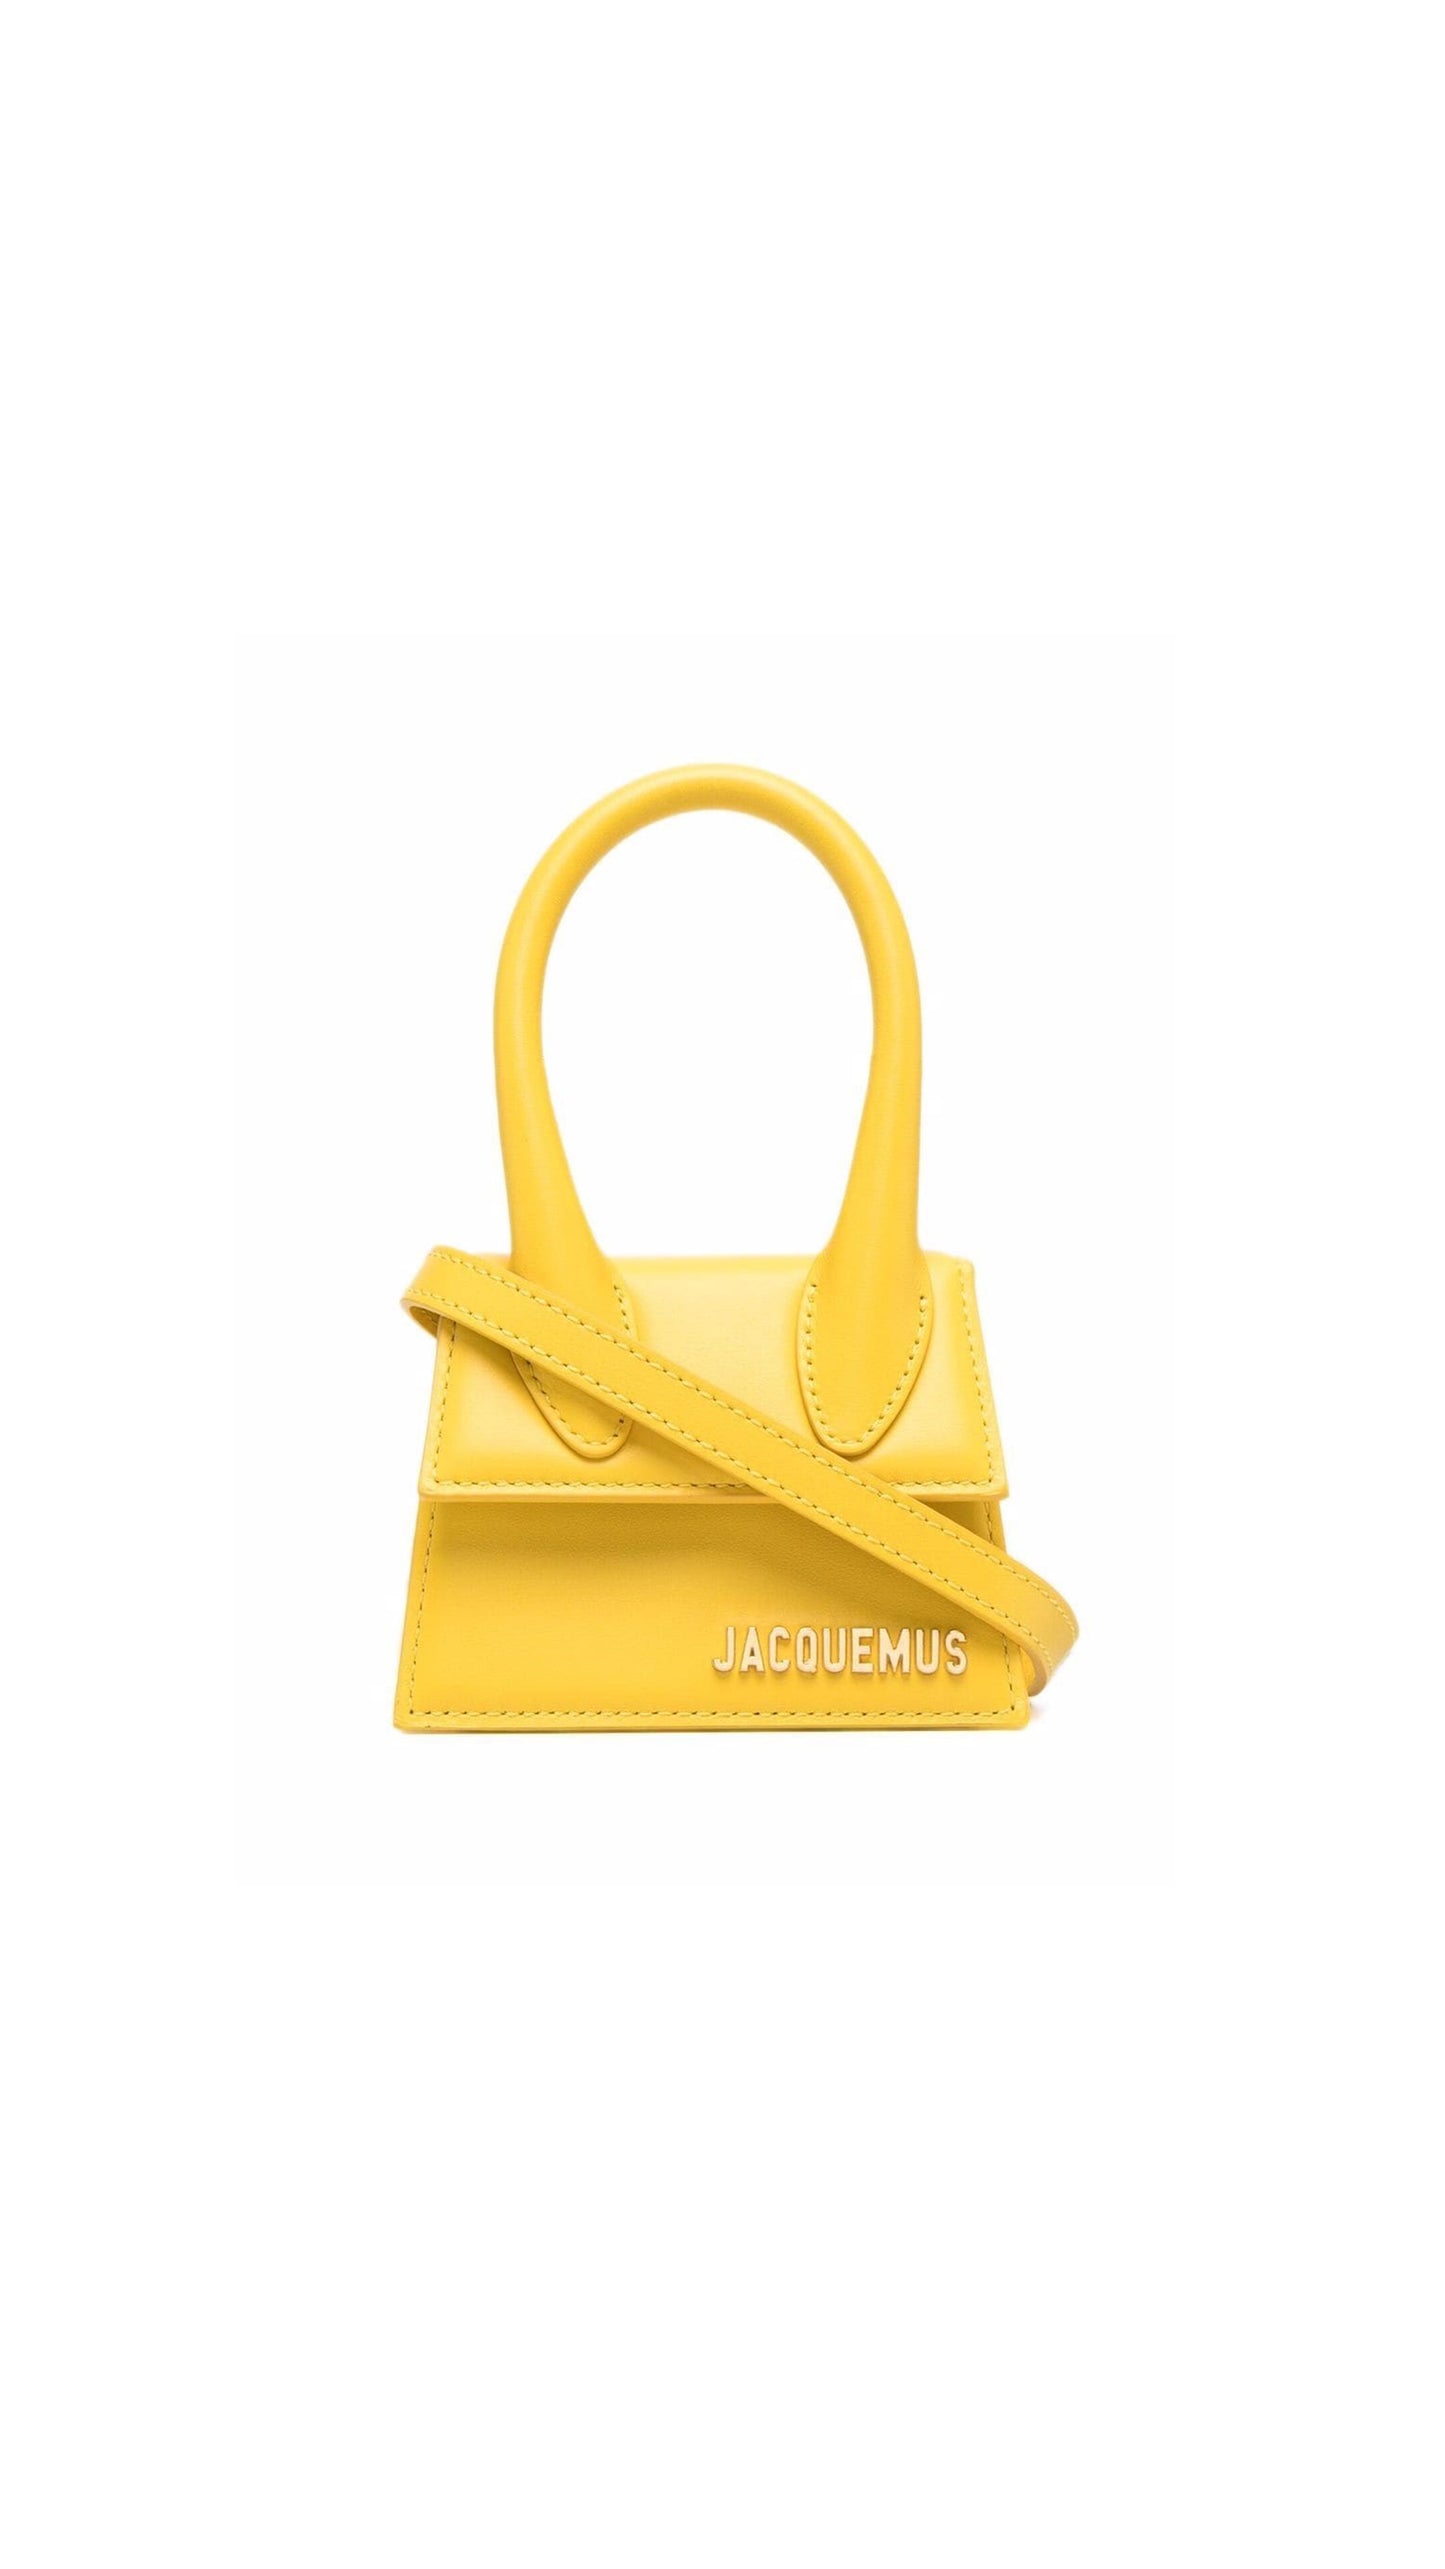 Le Chiquito Bag - Yellow